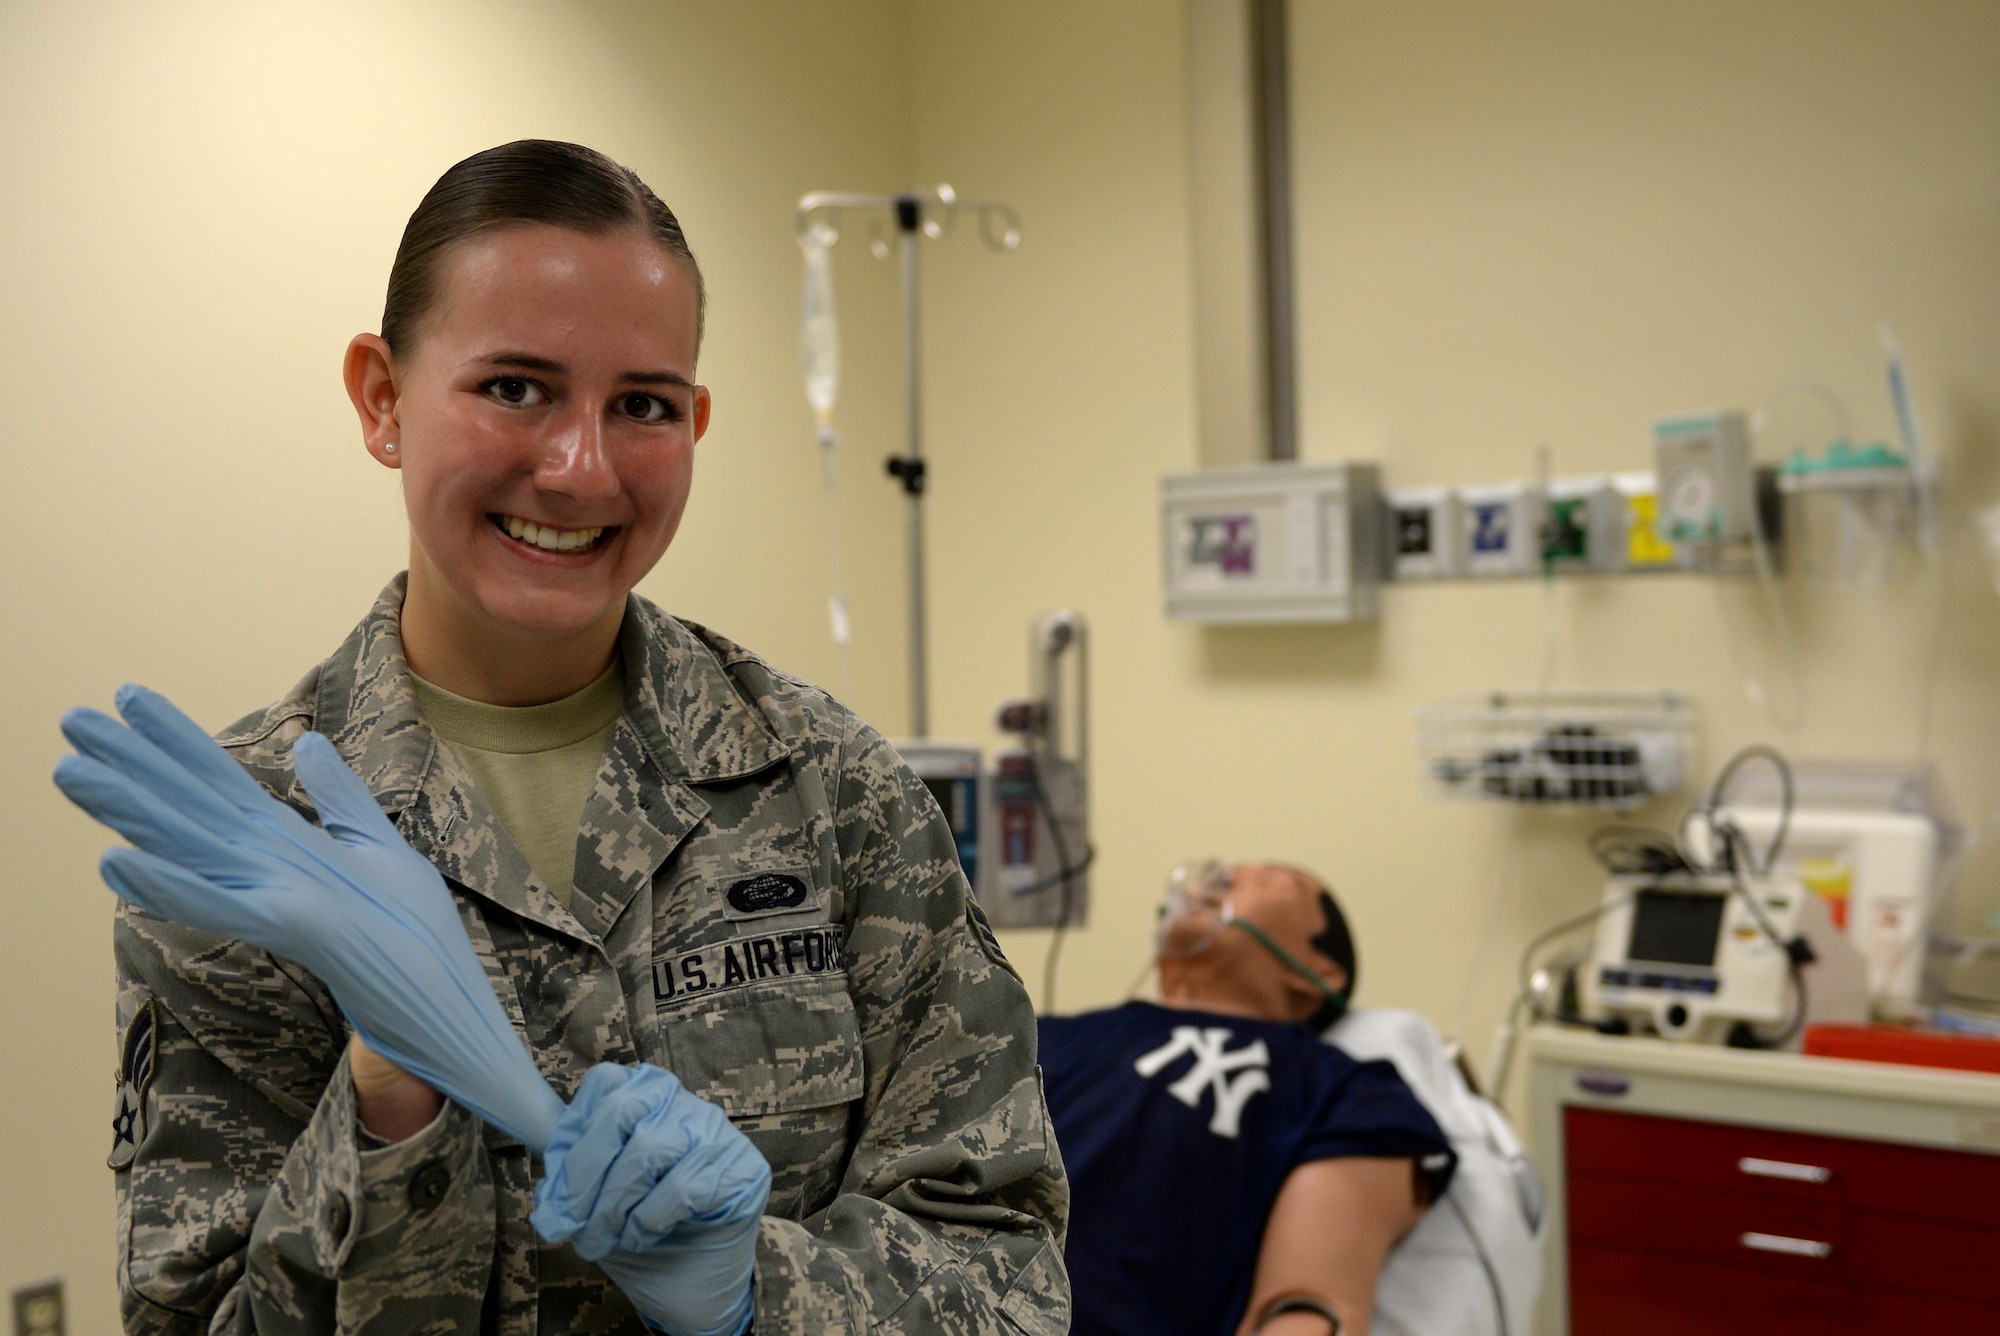 Senior Airman Alyssa Johnson, 81st Force Support Squadron force management journeyman, puts on gloves in the Keesler Medical Simulation and Clinical Skills Center, July 7, 2015, Keesler Air Force Base, Miss. Johnson, who has been stationed at Keesler for three years, was selected for the Air Force Nurse Enlisted Commissioning Program and will begin school Aug. 24, 2015 at the University of West Florida, Pensacola, Fla. (U.S. Air Force photo by Airman 1st Class Duncan McElroy)